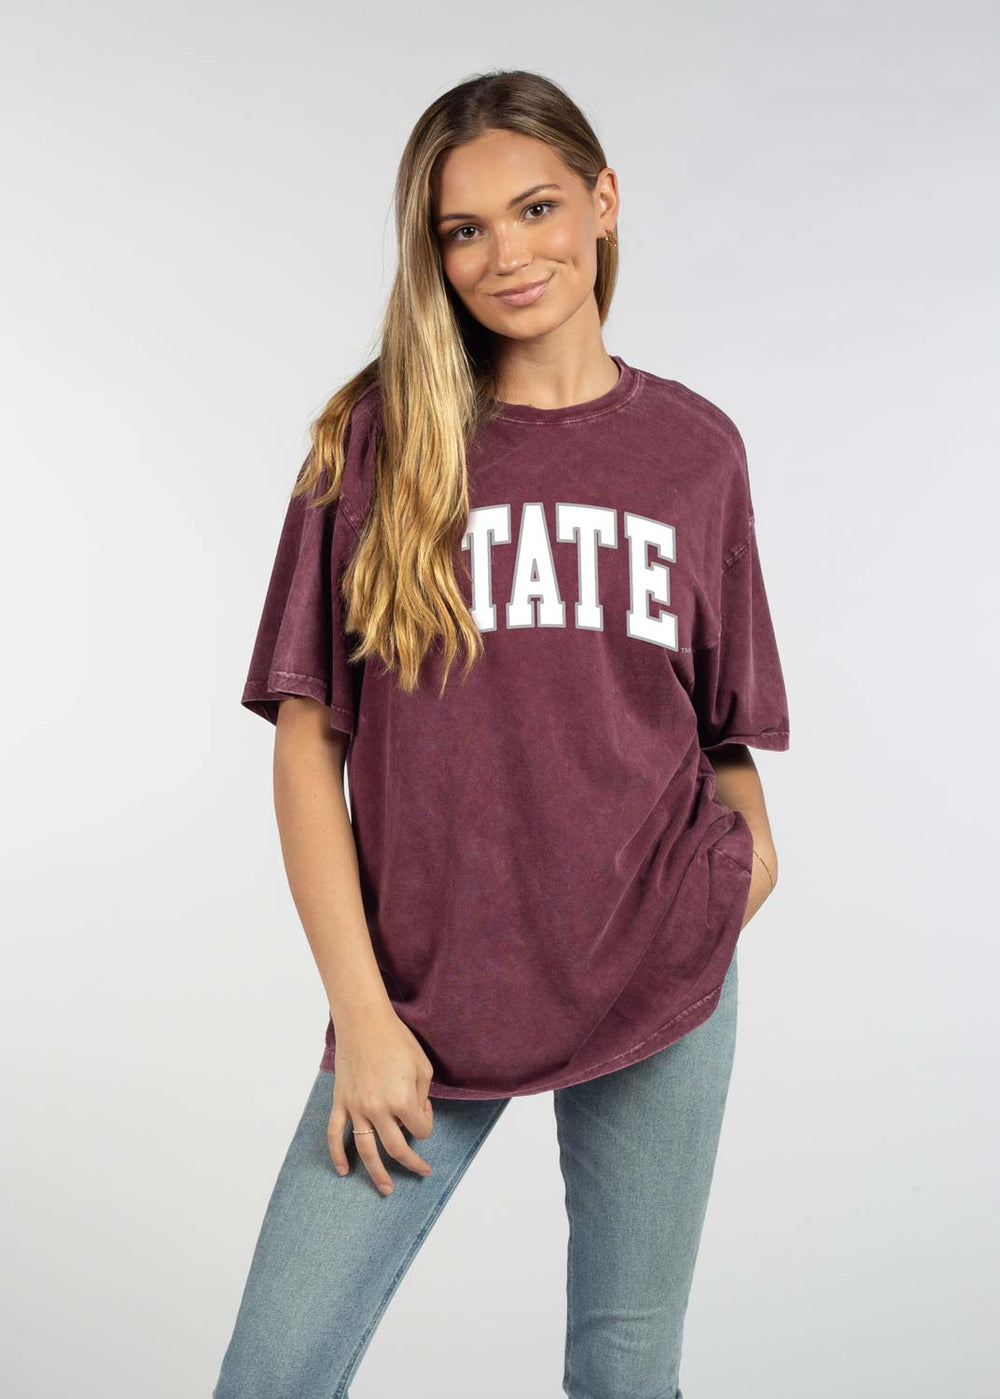 Chicka-d MS State Band Tee Merlot